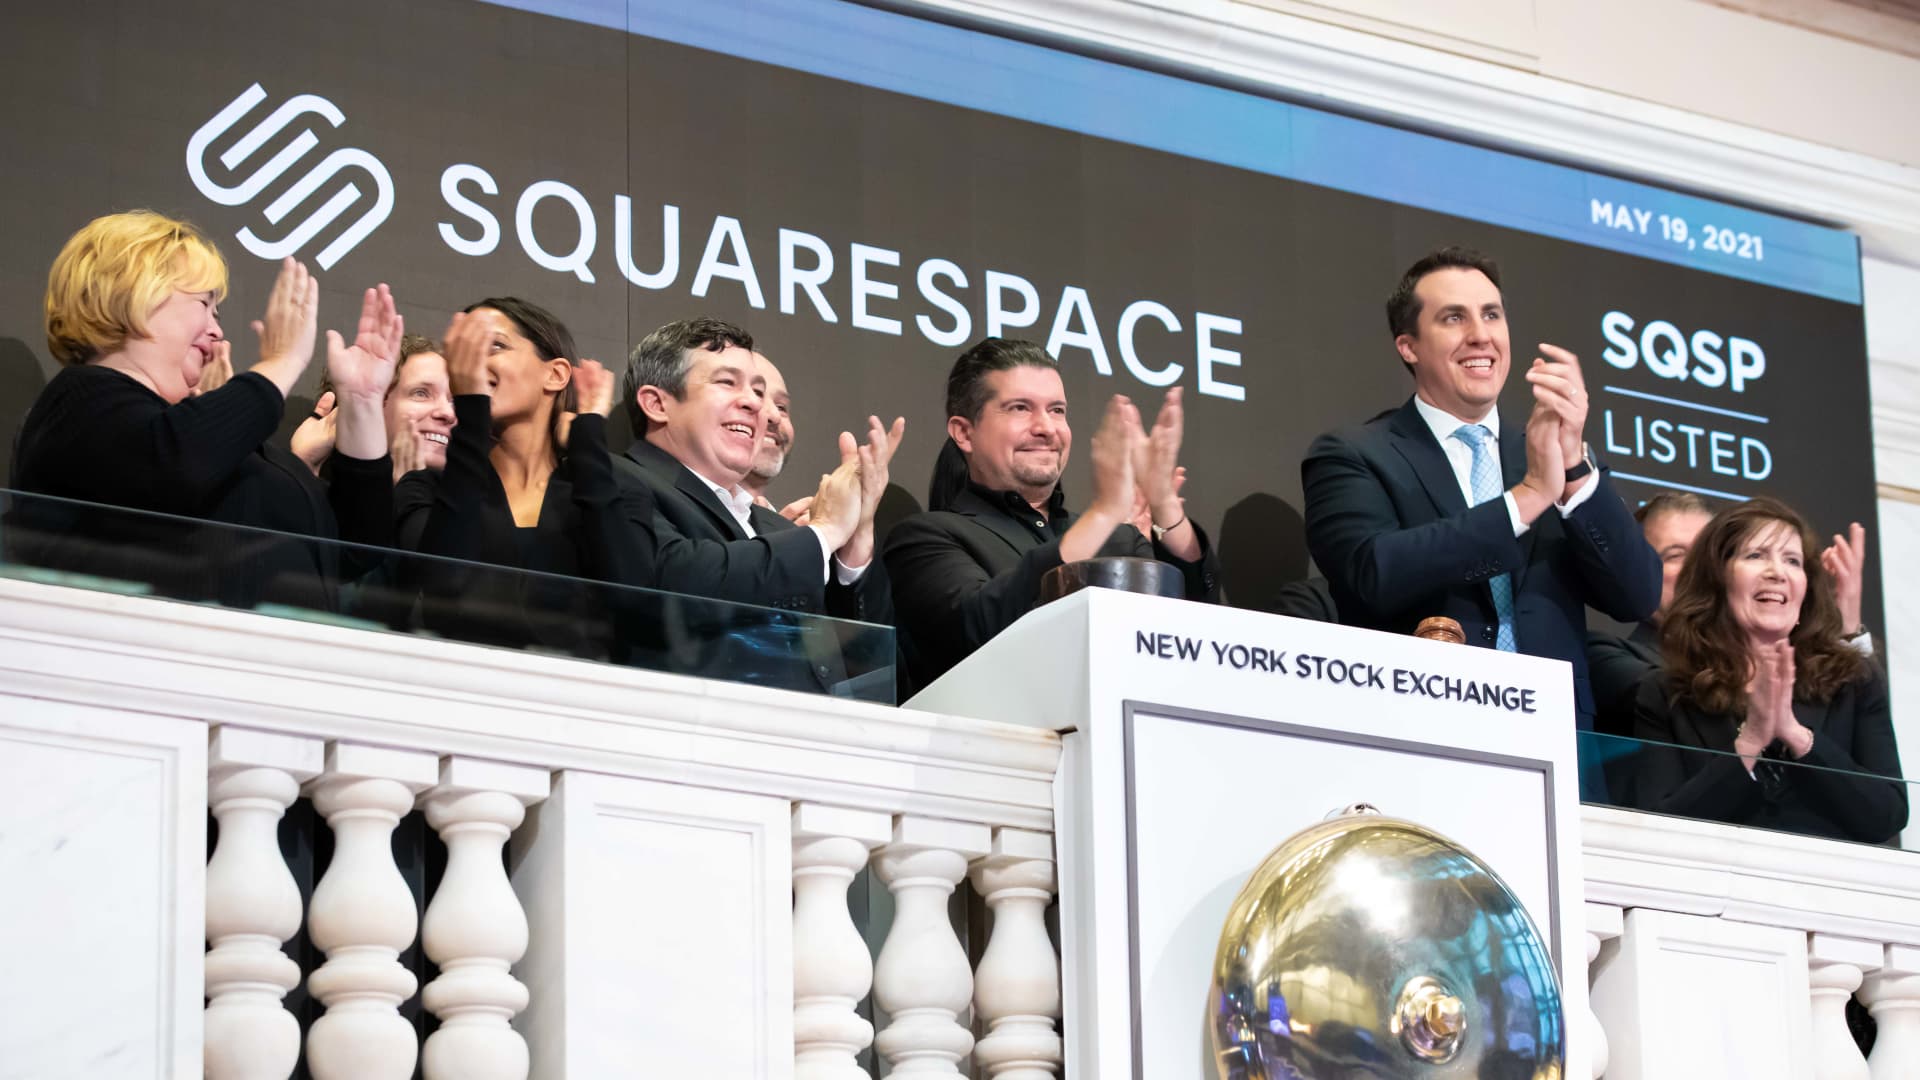 Squarespace to go private in $7 billion private-equity deal